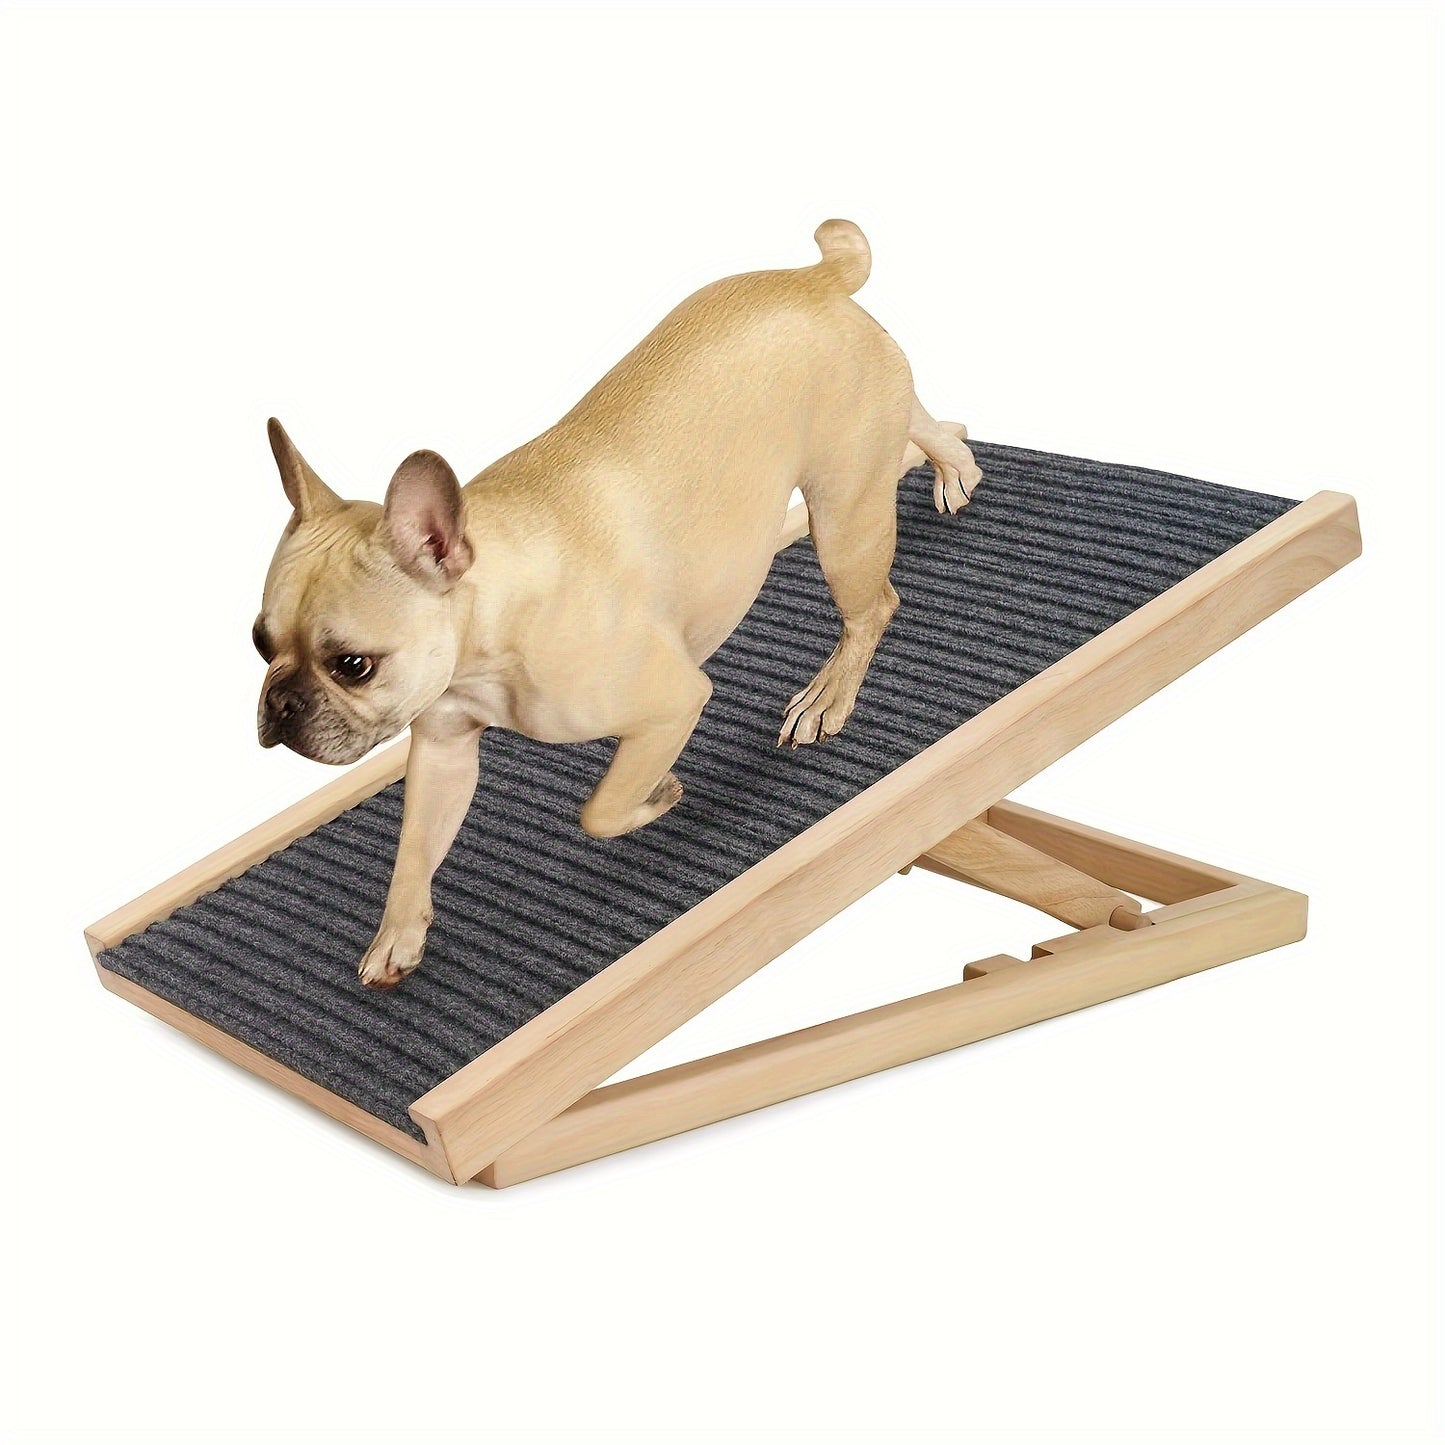 Adjustable Wooden Pet Staircase, With Different Heights And Slopes For Dogs For Getting On The Sofa, And Getting On The Bed